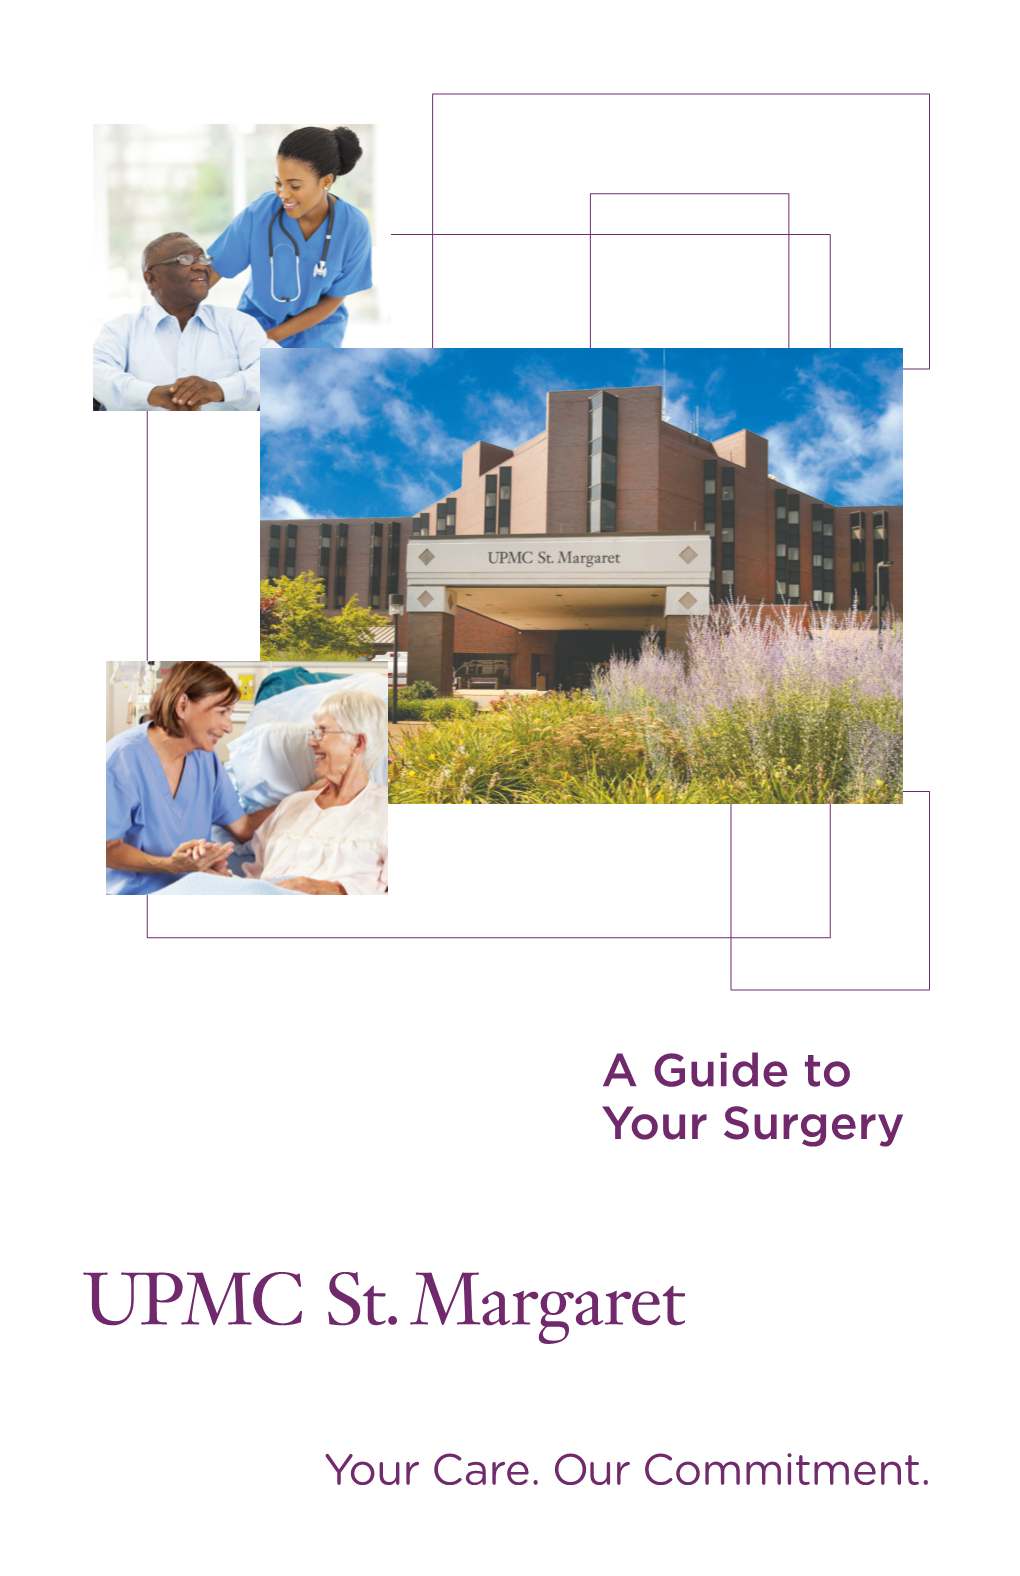 A Guide to Your Surgery at UPMC St. Margaret